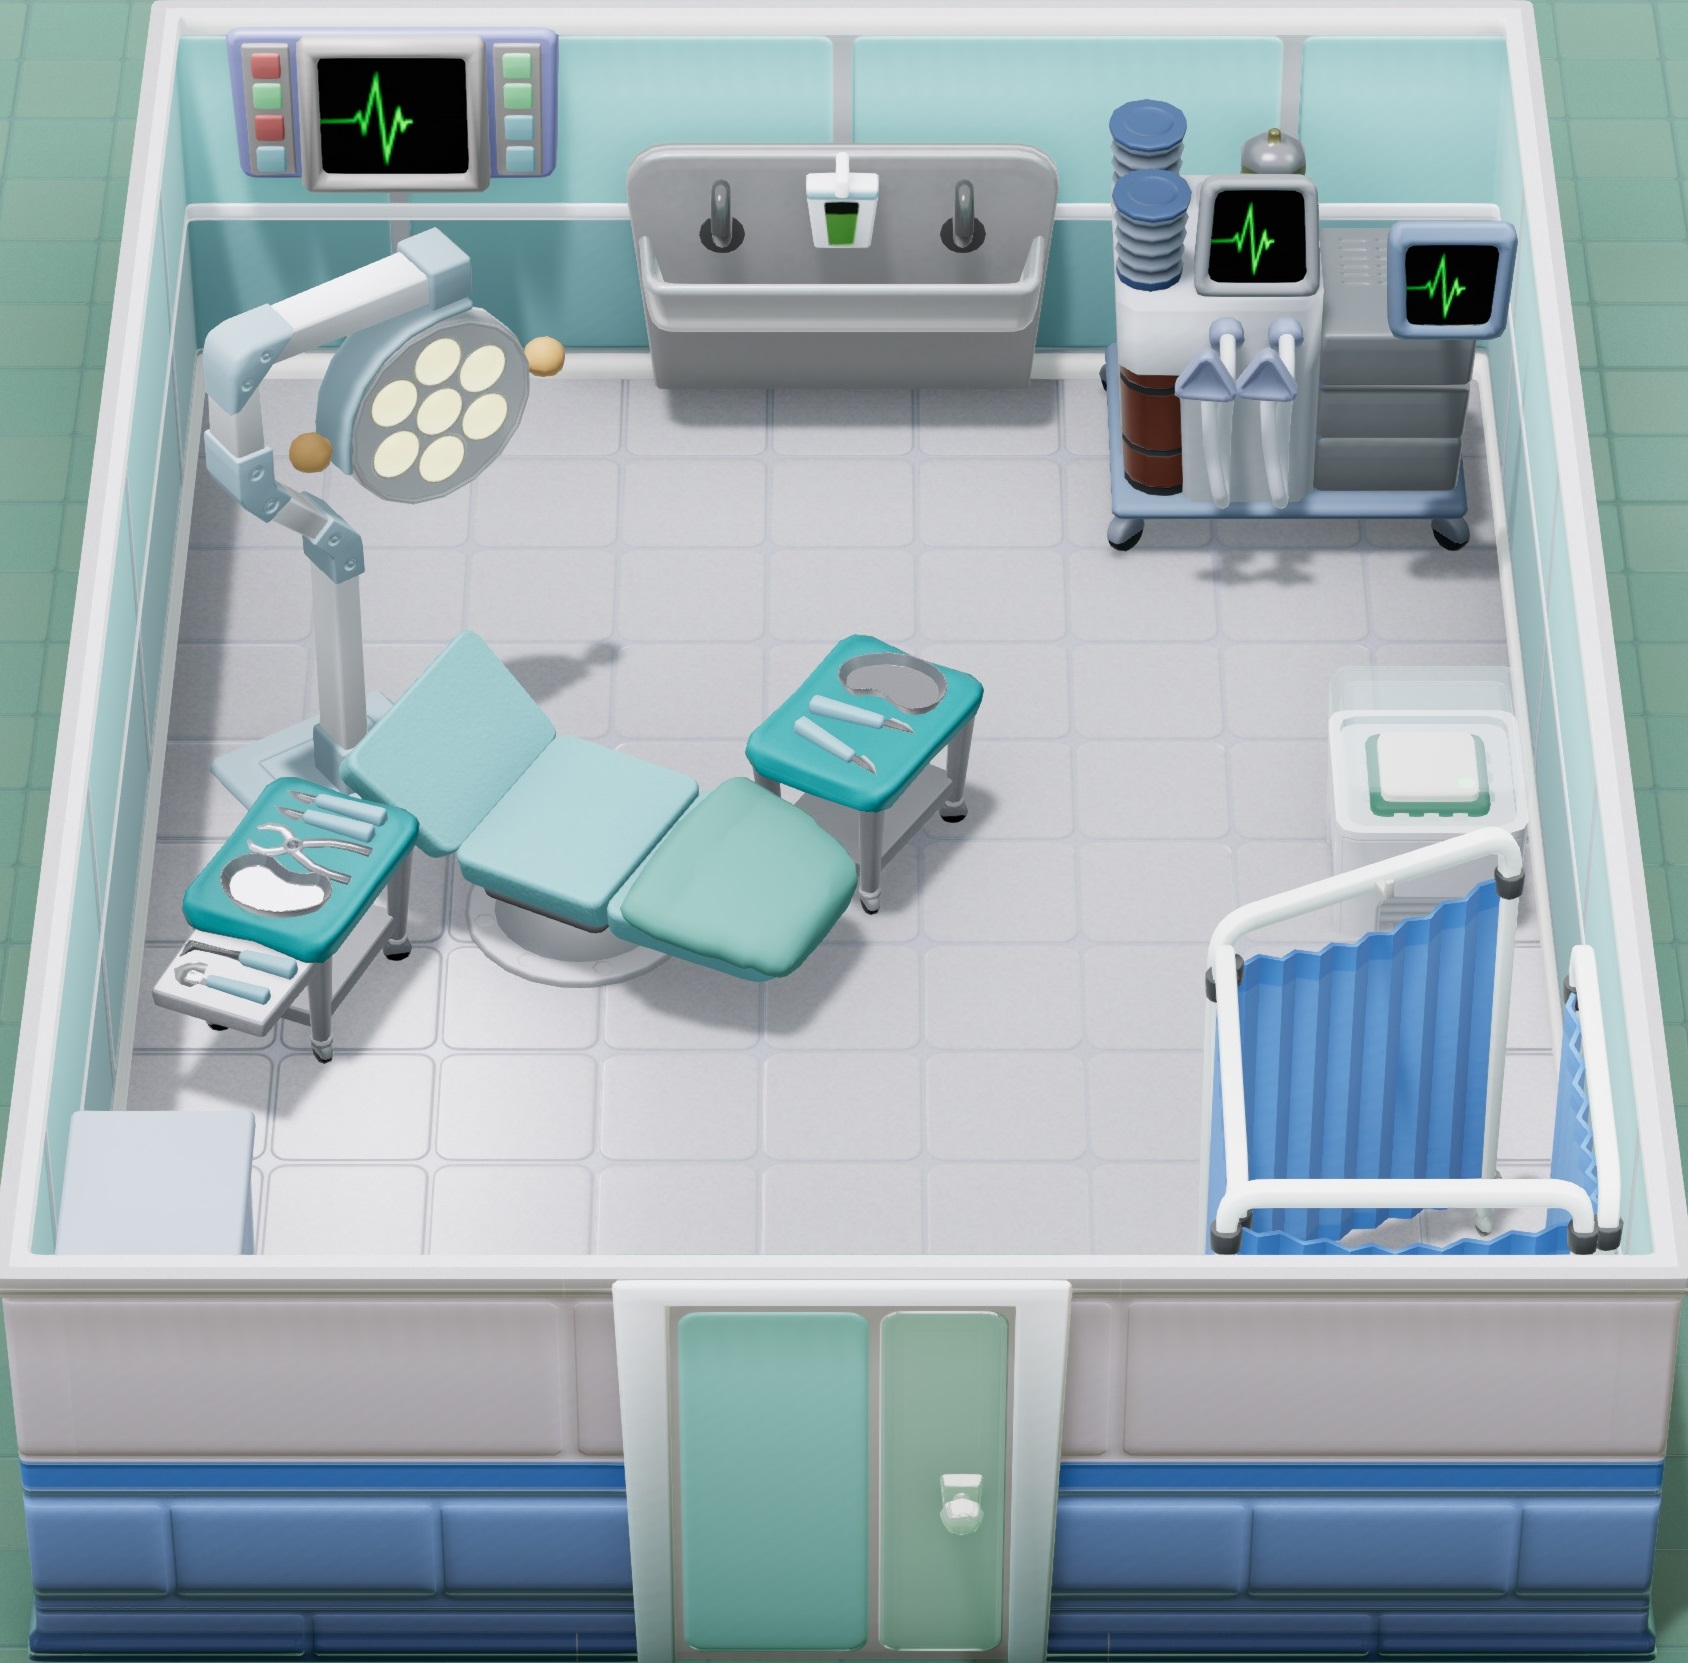 two point hospital achievements